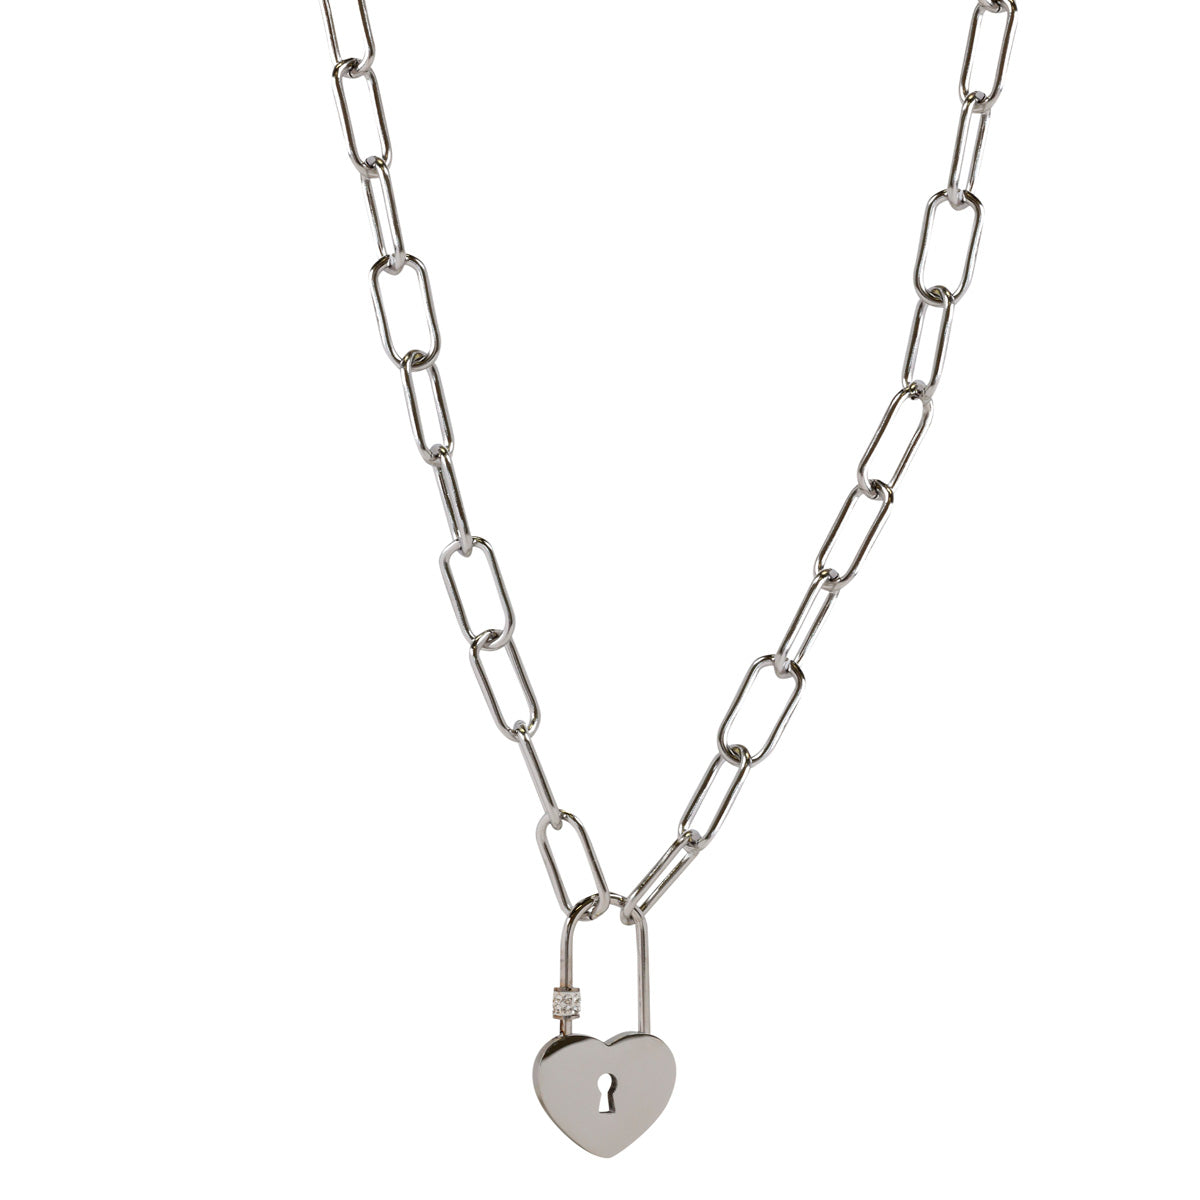 Cable chain necklace with 43.5cm +5cm (steel)